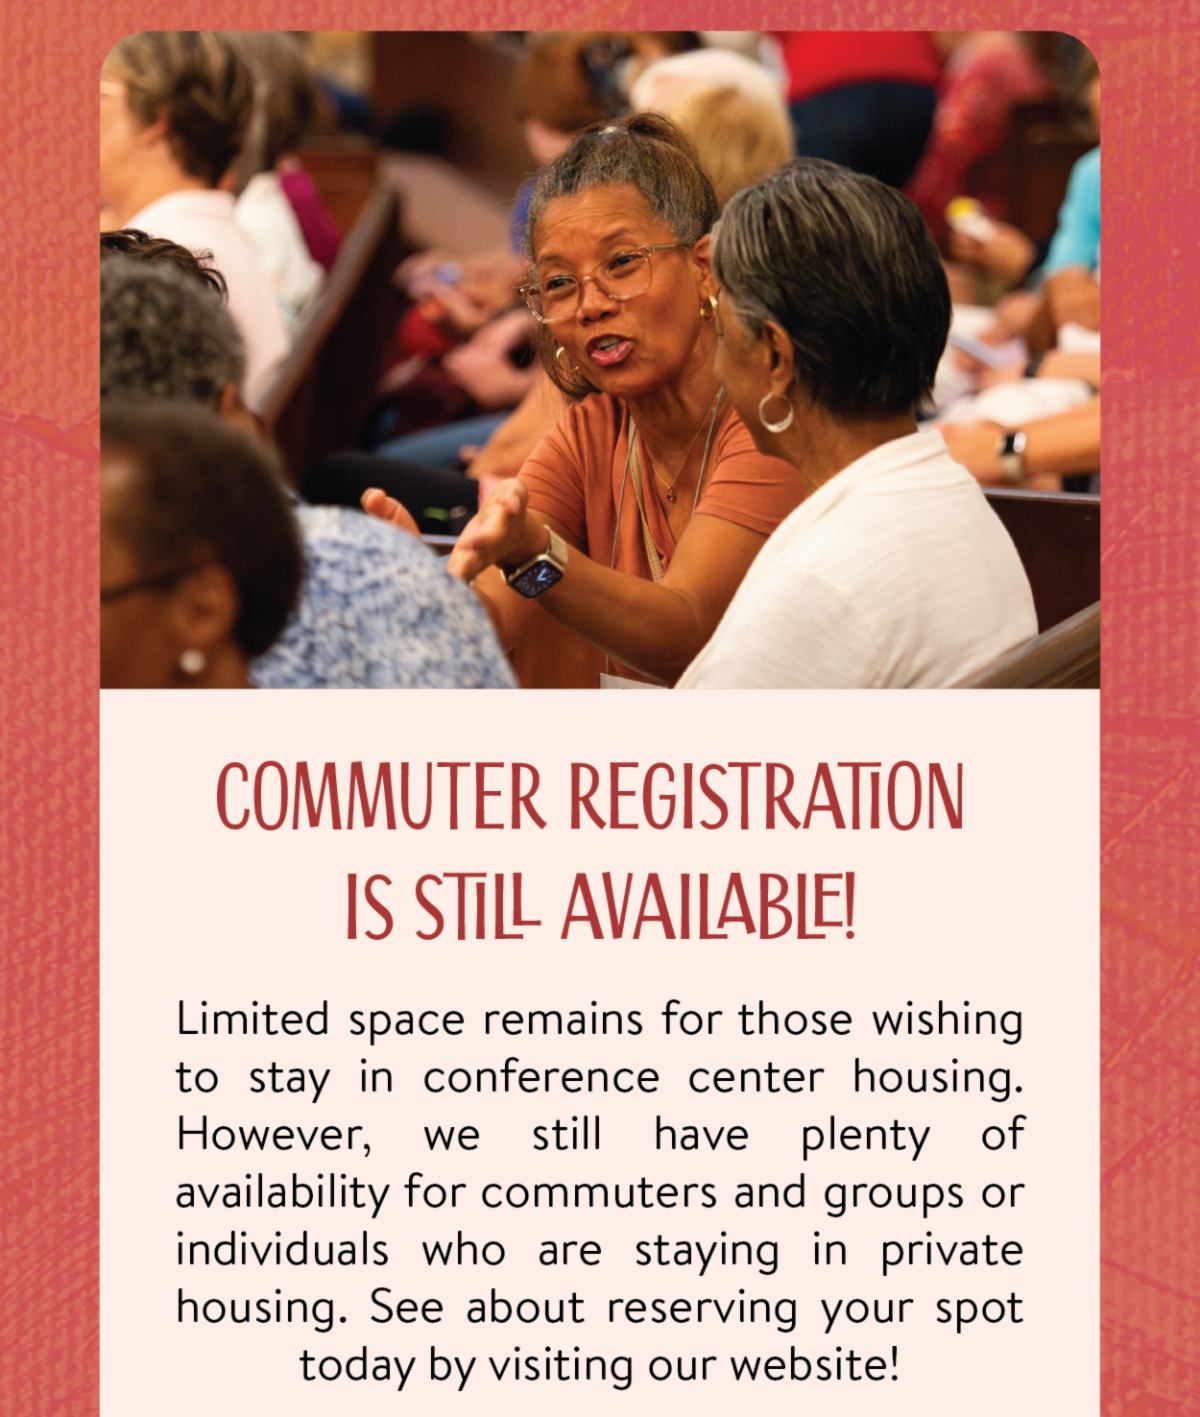 Commuter Registration is still available! - Limited space remains for those wishing to stay in conference center housing. However, we still have plenty of availability for commuters and groups or individuals who are staying in private housing. See about reserving your spot today by visiting our website!